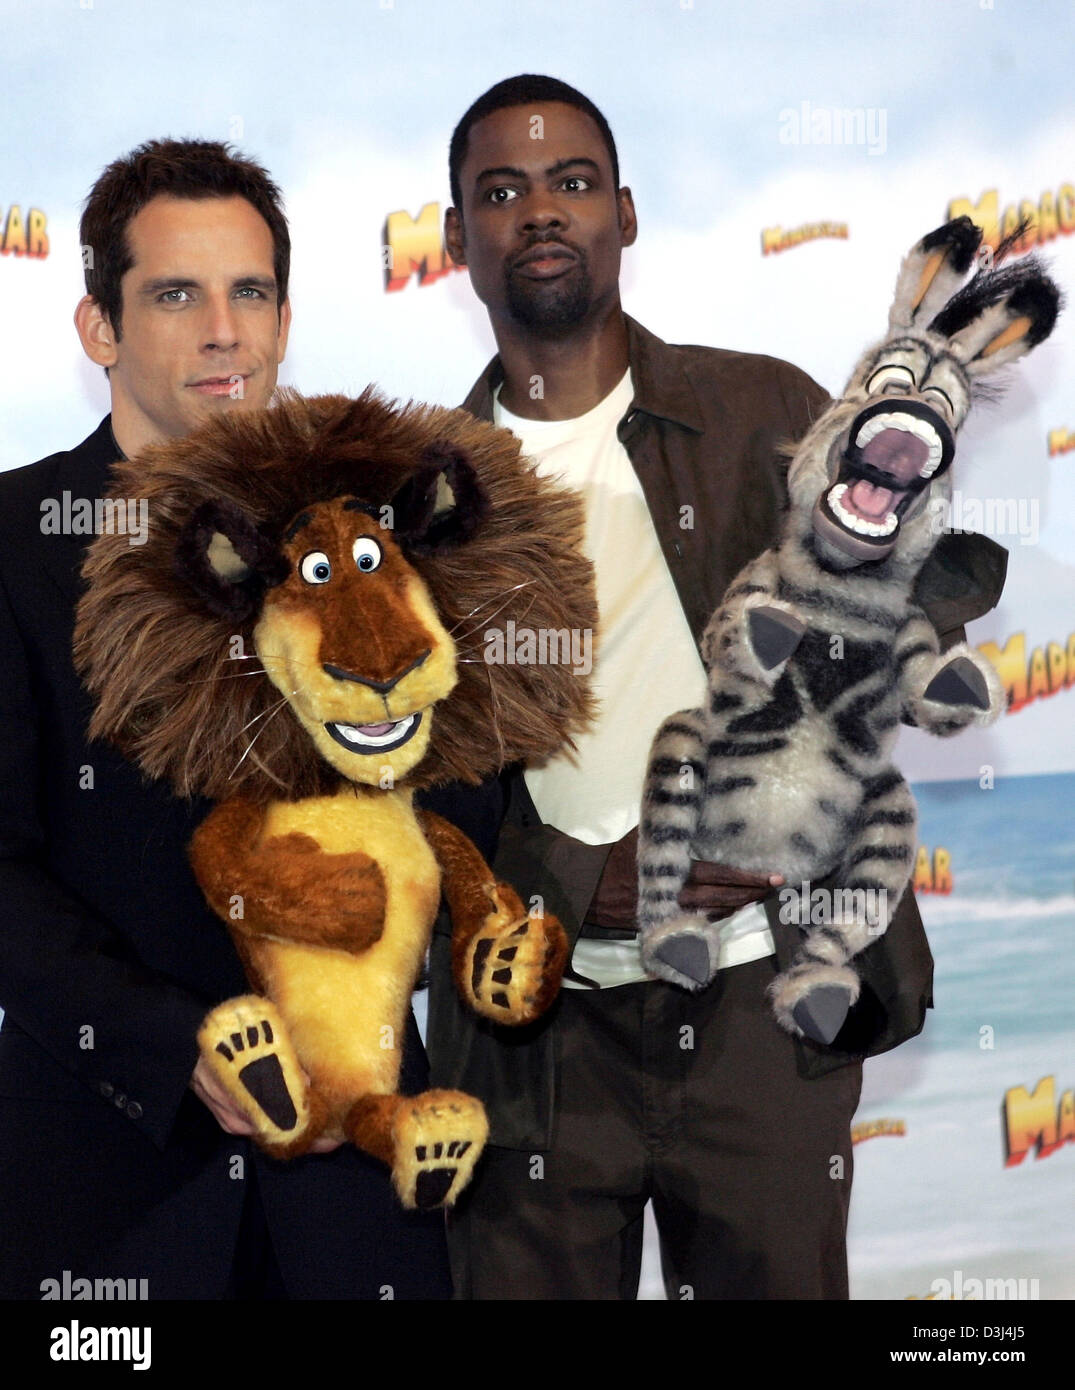 (dpa) - US-Actors Ben Stiller (L) and Chris Rock pictured with their characters' rag dolls they voice in the animated film 'Madagascar' at the Hotel Adlon in Berlin, Germany, Friday 10 June 2005. In the animated film the inhabitants of the New York zoo prepare to break free into the big wide world. The German premiere will be on 7 July 2005. Stock Photo